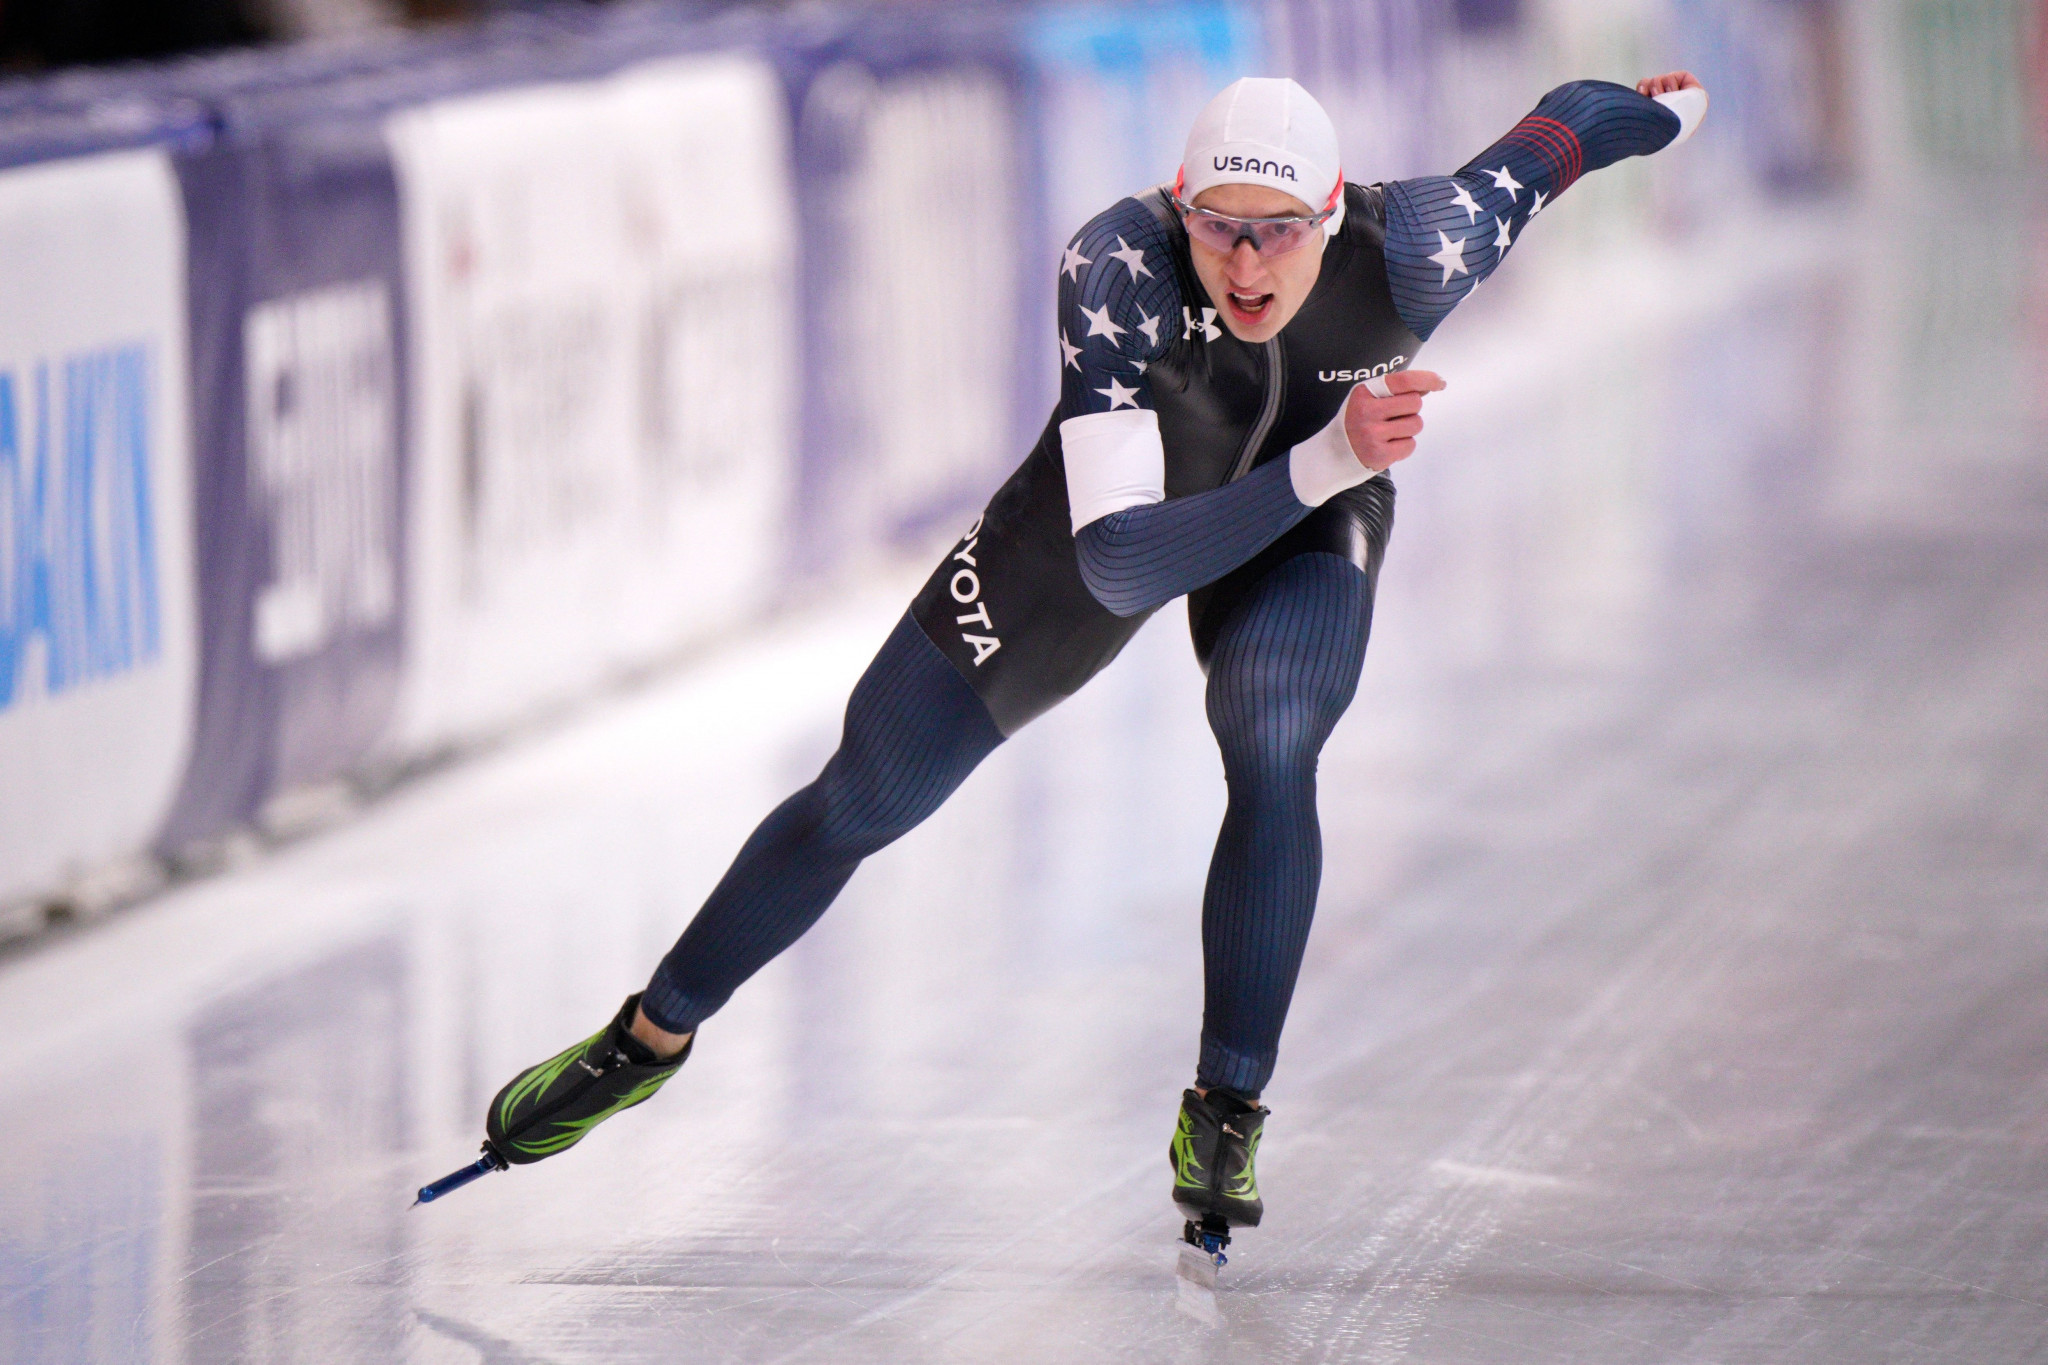 Jordan Stolz of the United States won the men's 1,500m gold in Tomaszów Mazowiecki ©Getty Images